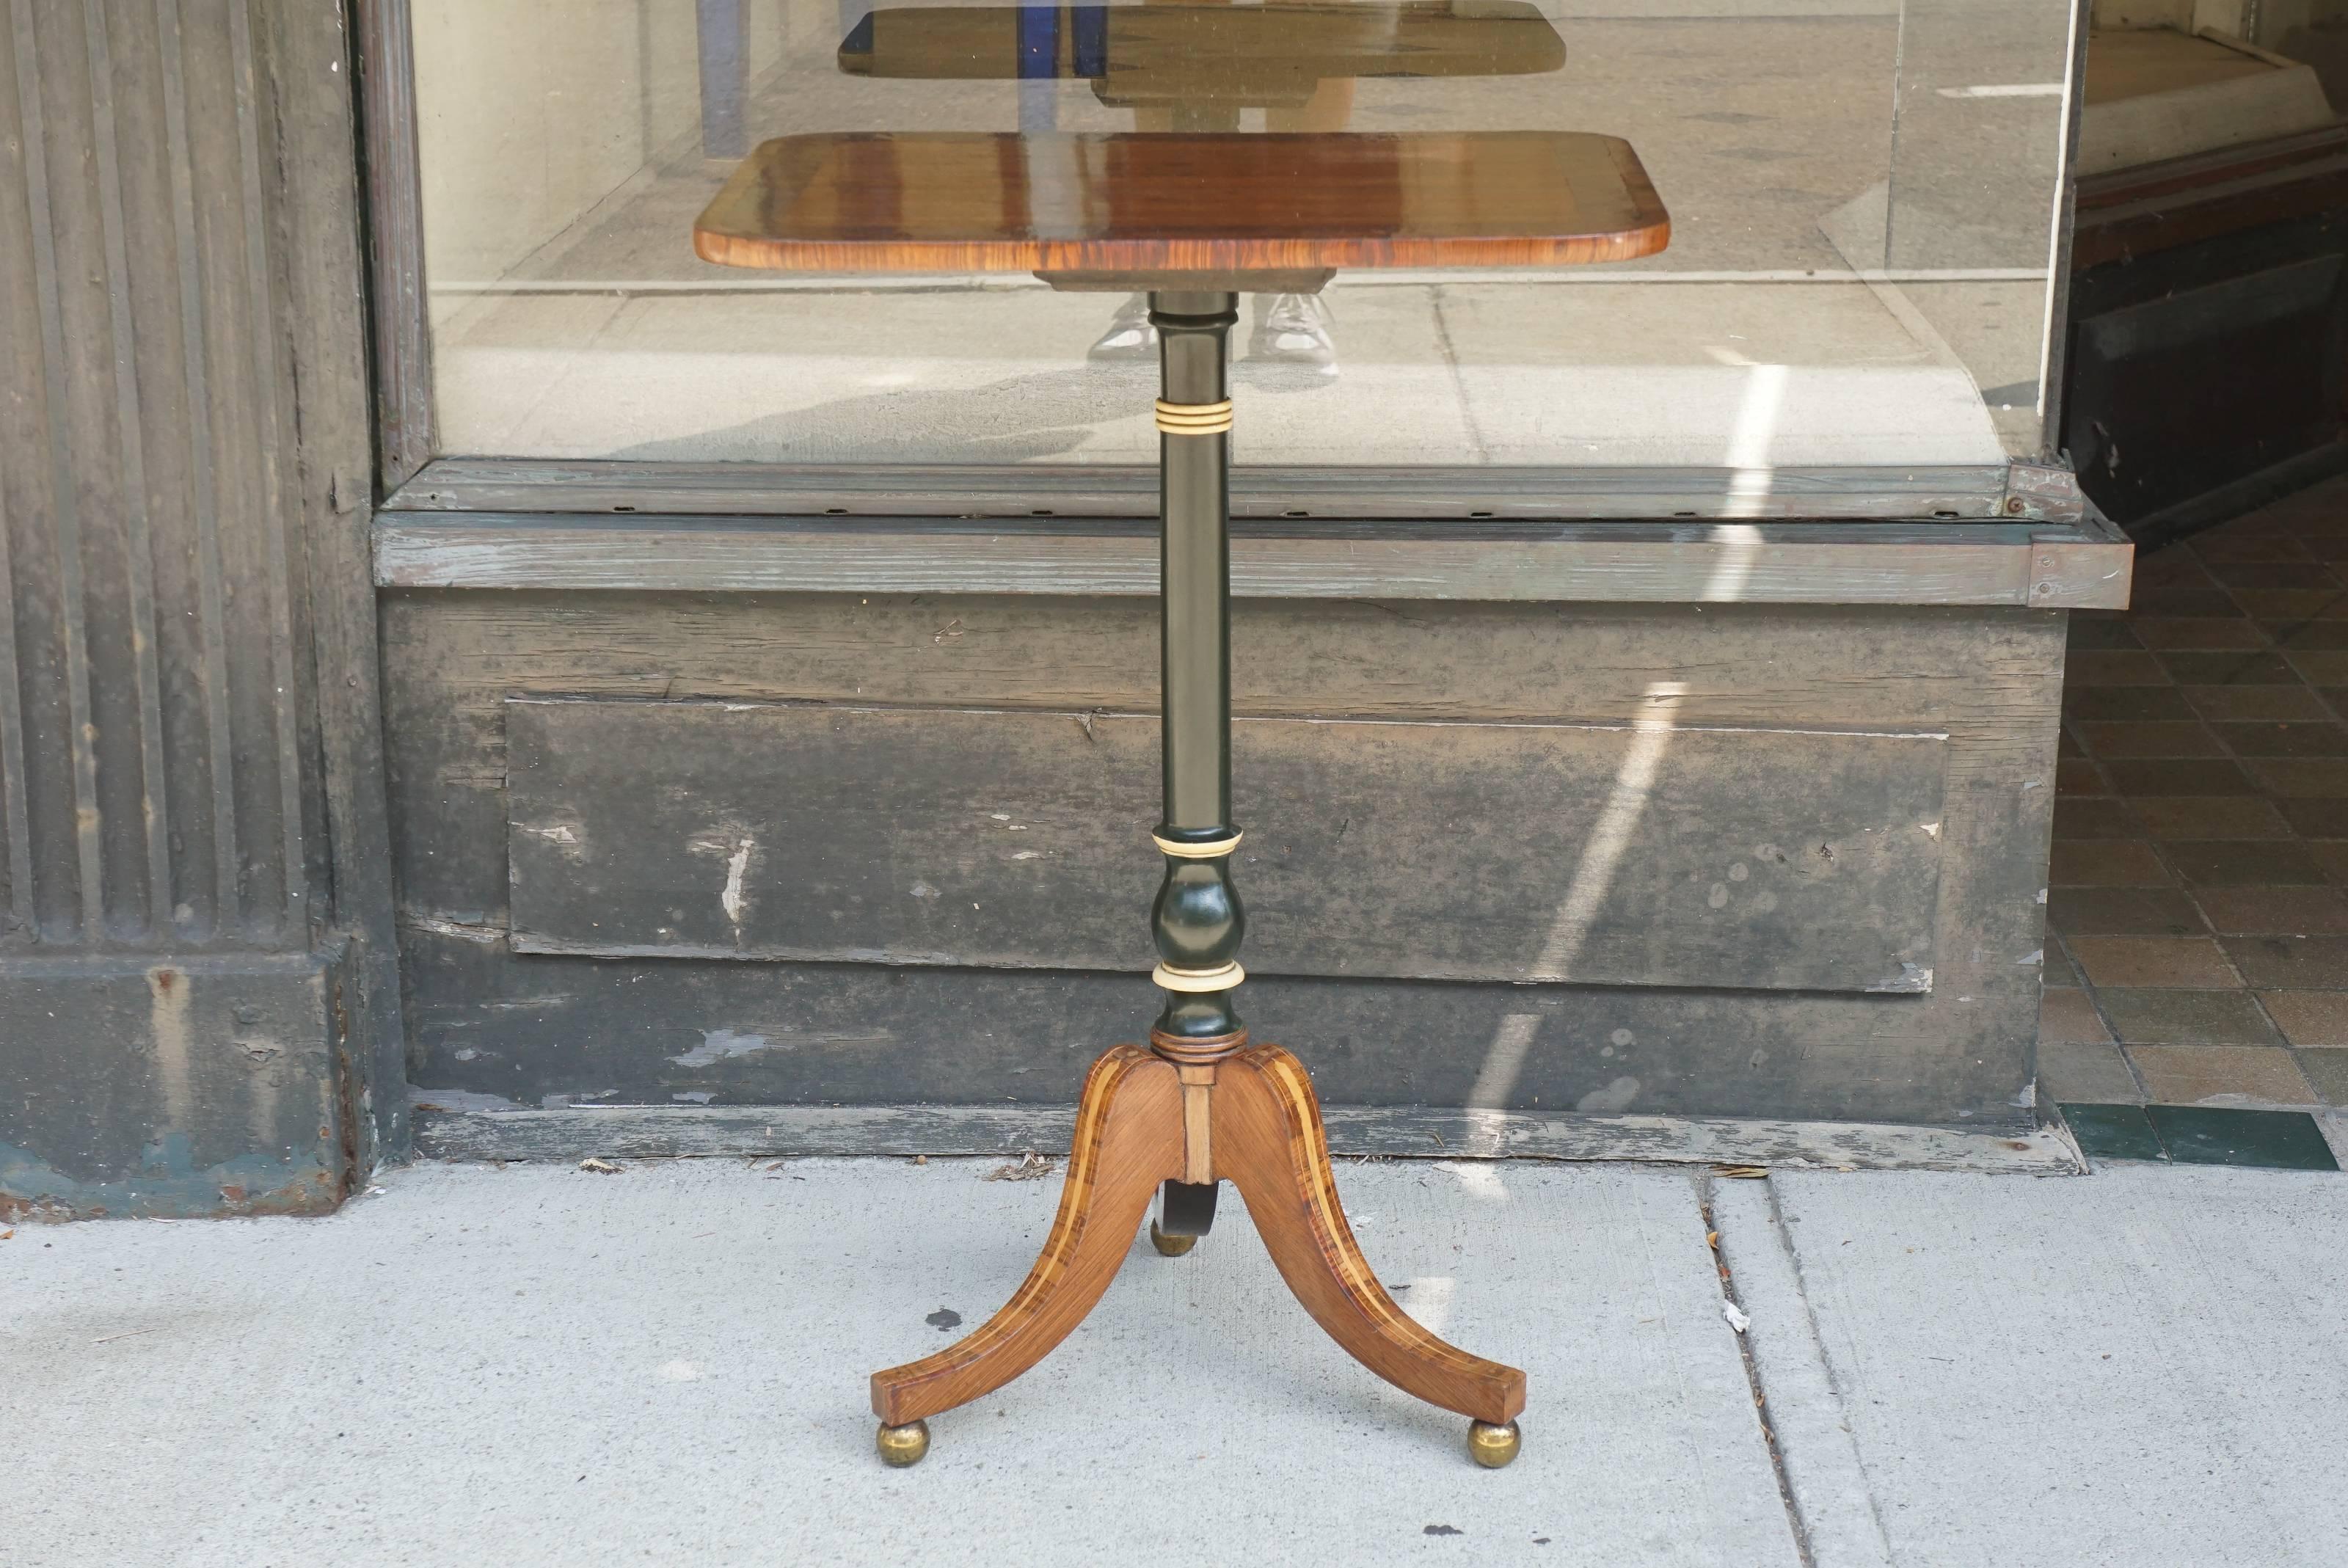 This fine small table is beautifully crafted. The top is blond mahogany banded in burled walnut and trimmed with rosewood. The ebonized and polychromed stem support rests on three splayed legs with large holy inlaid spears running down the center of